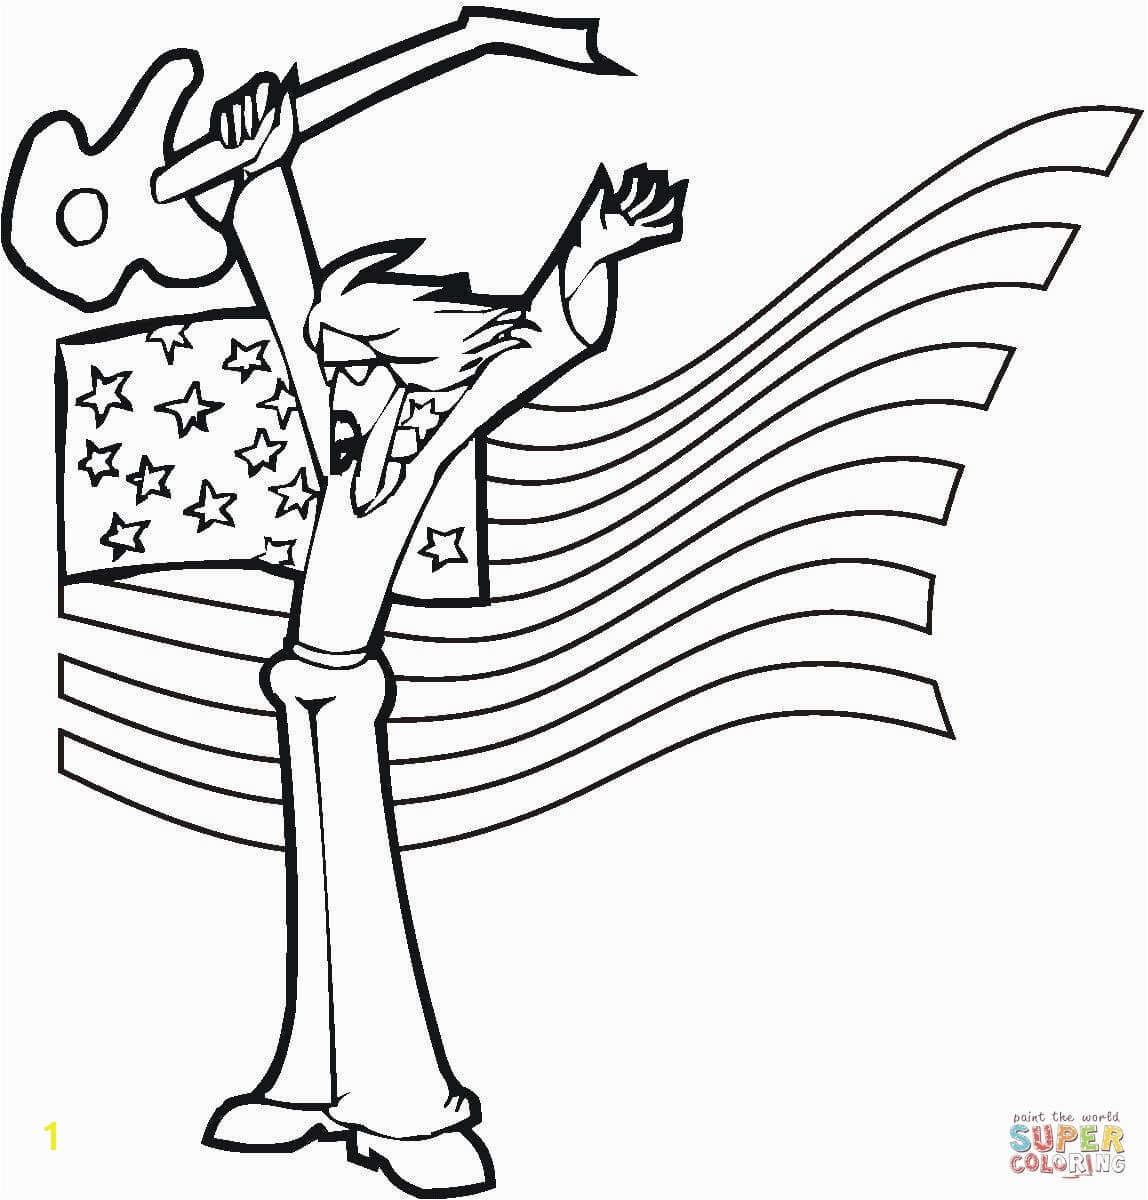 the American Rock Star coloring pages to view printable